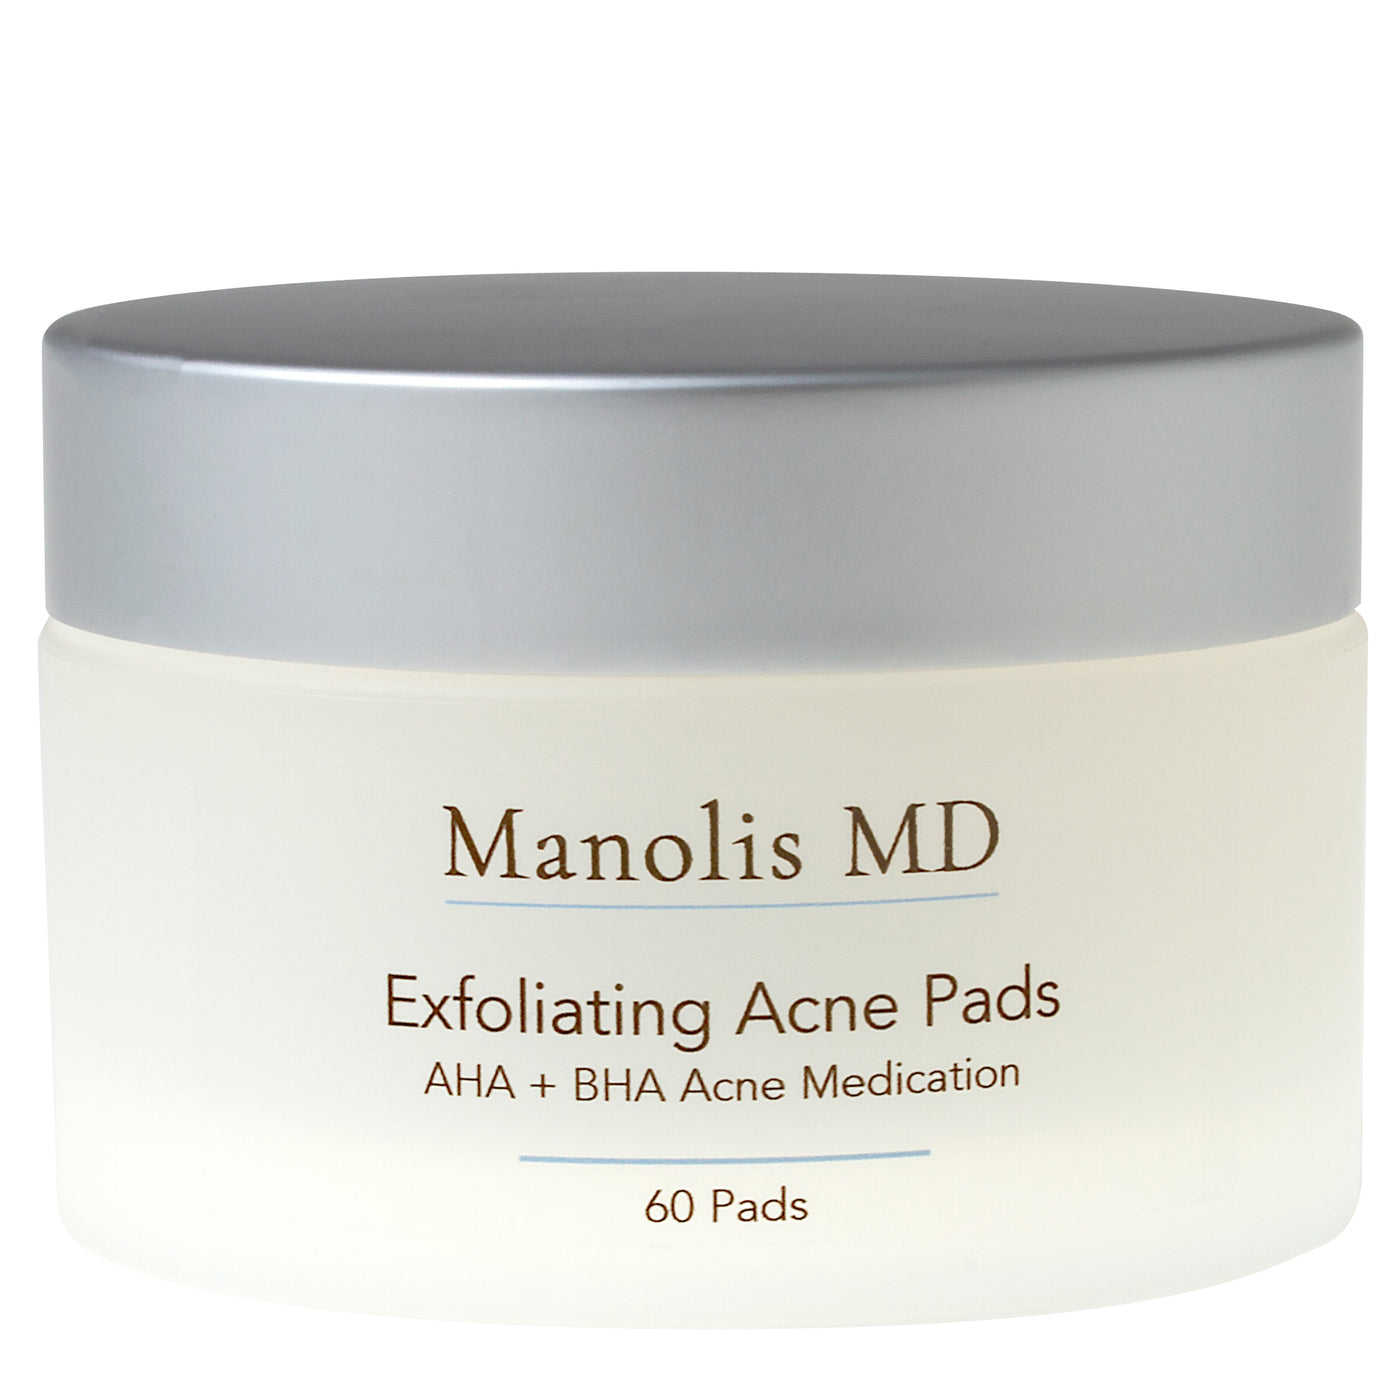 Our Exfoliating Acne Pads are a high potency combination of alpha (glycolic and lactic) and beta (salicylic) hydroxy acids, which when used regularly, can produce superficial exfoliating effects similar to those produced by an in-office chemical peel.